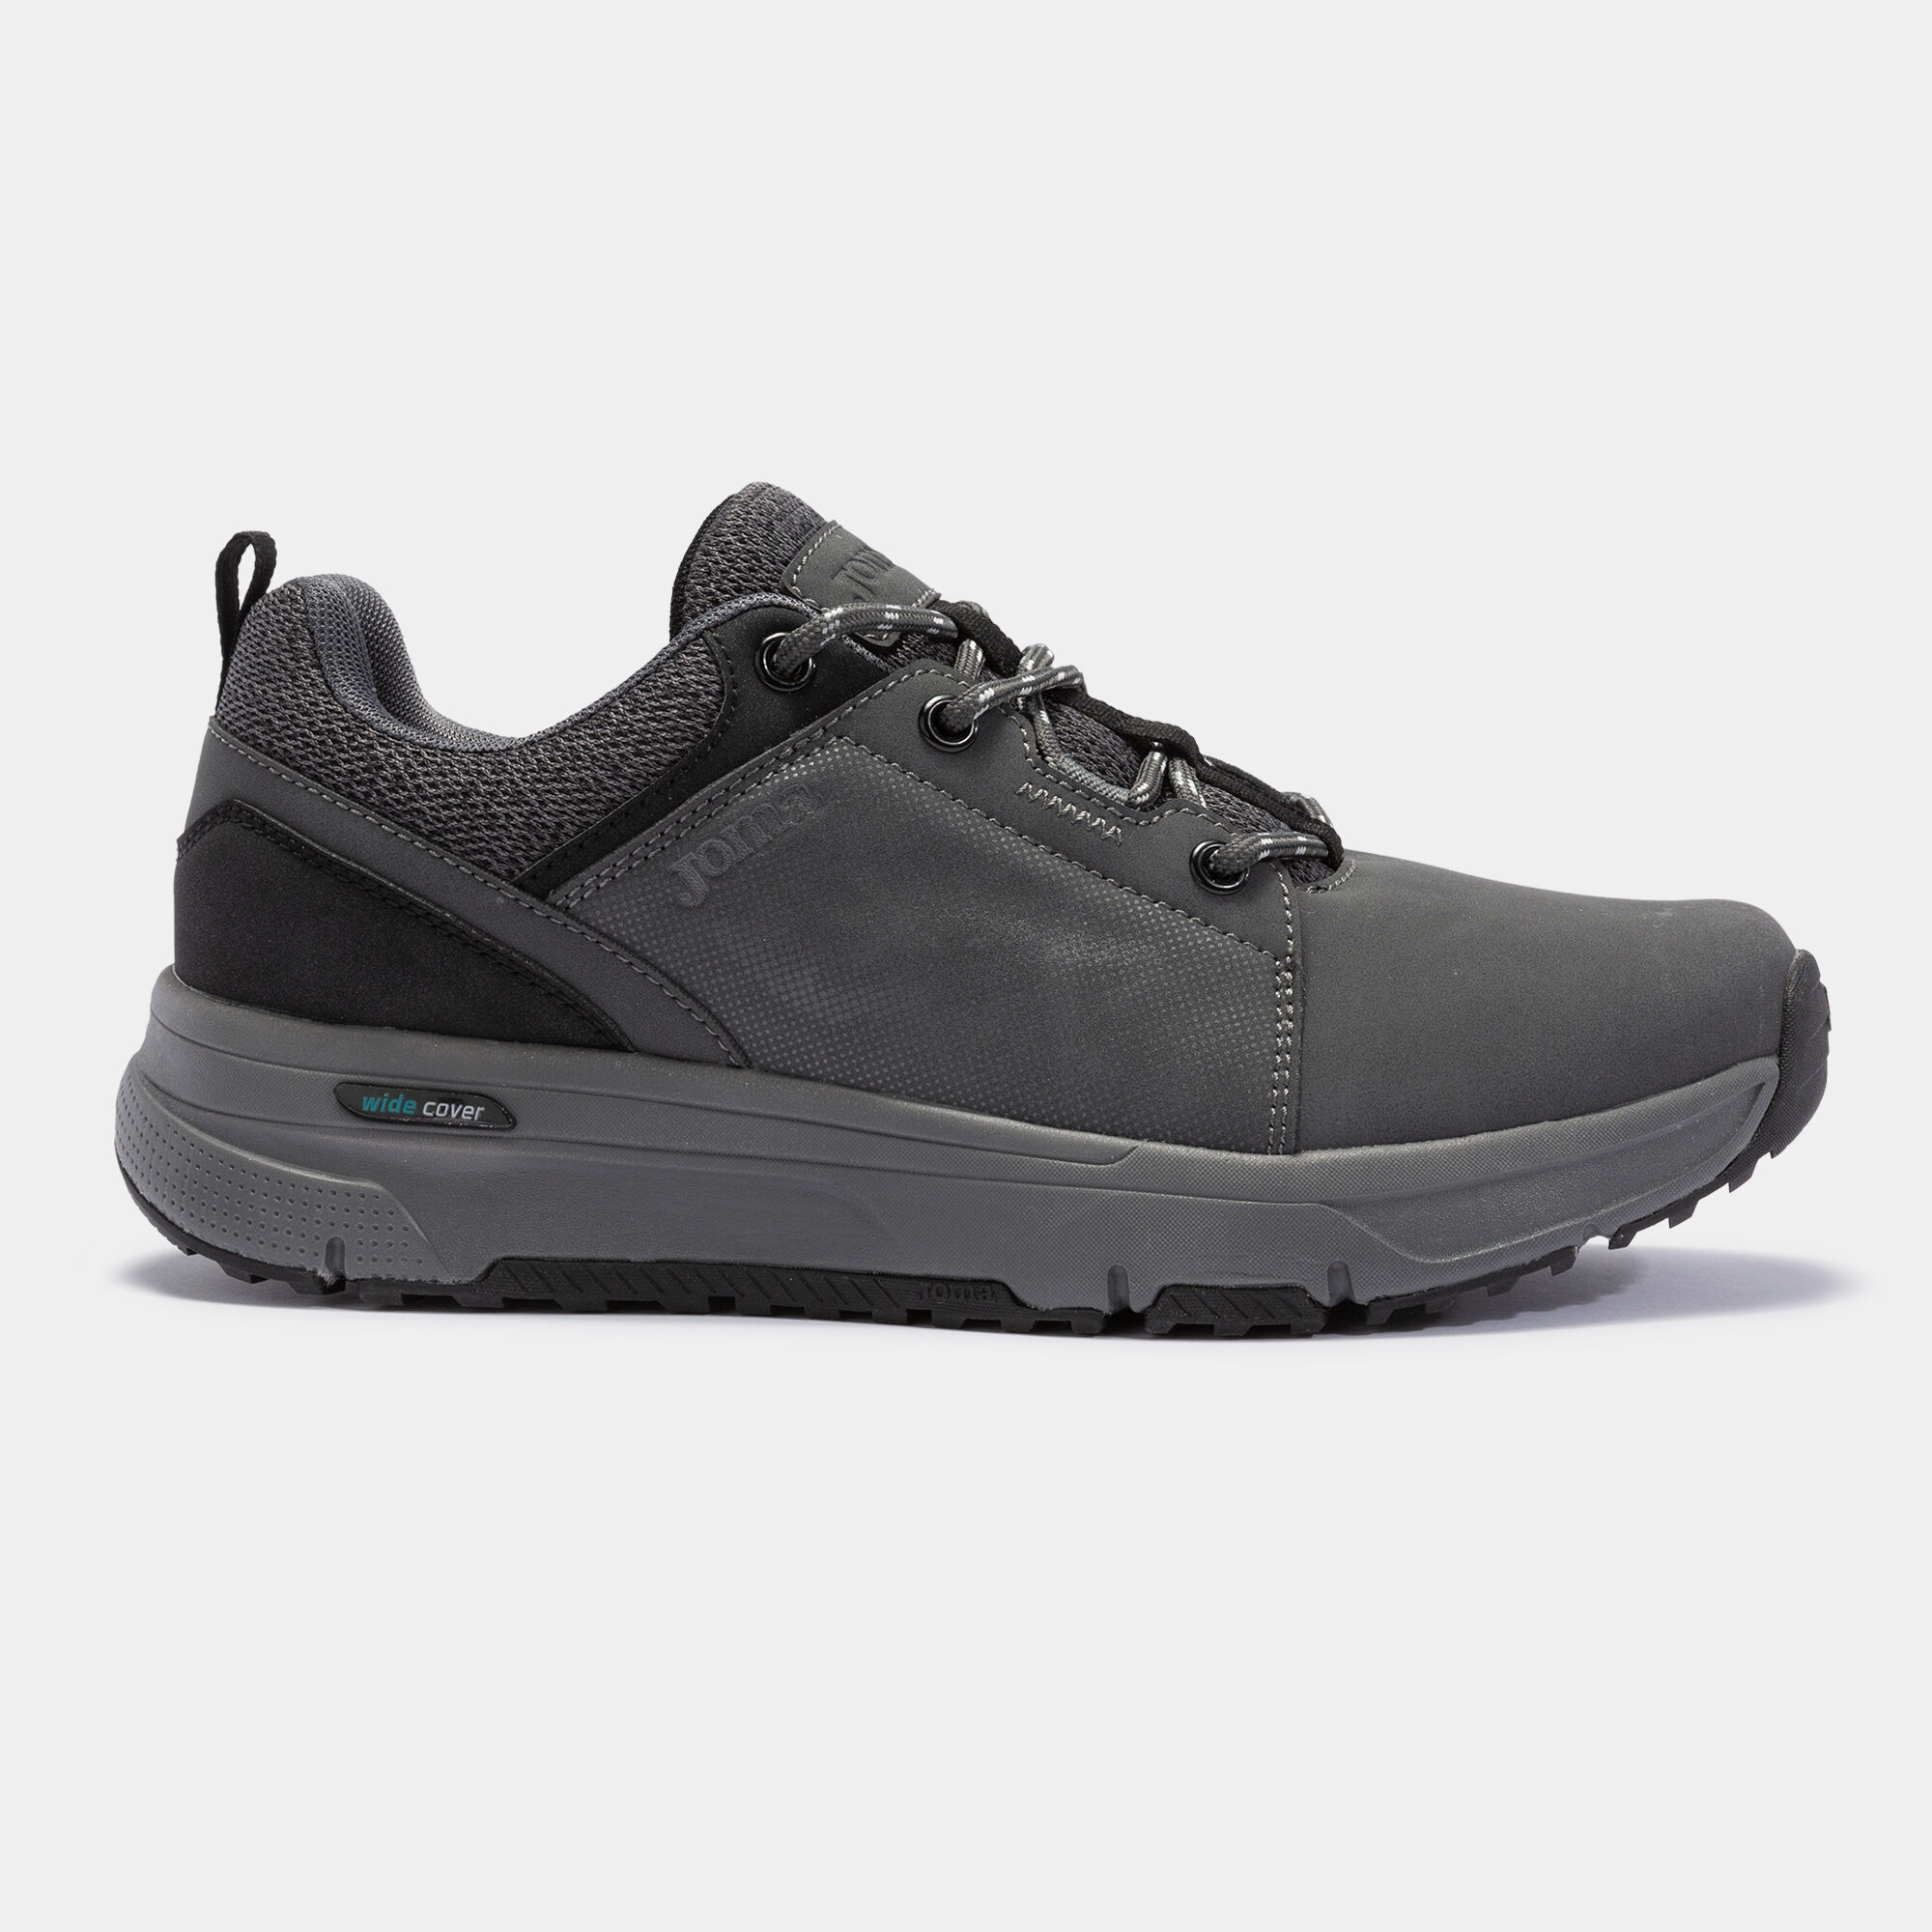 CHAUSSURES CASUAL SANABRIA 22 HOMME GRIS